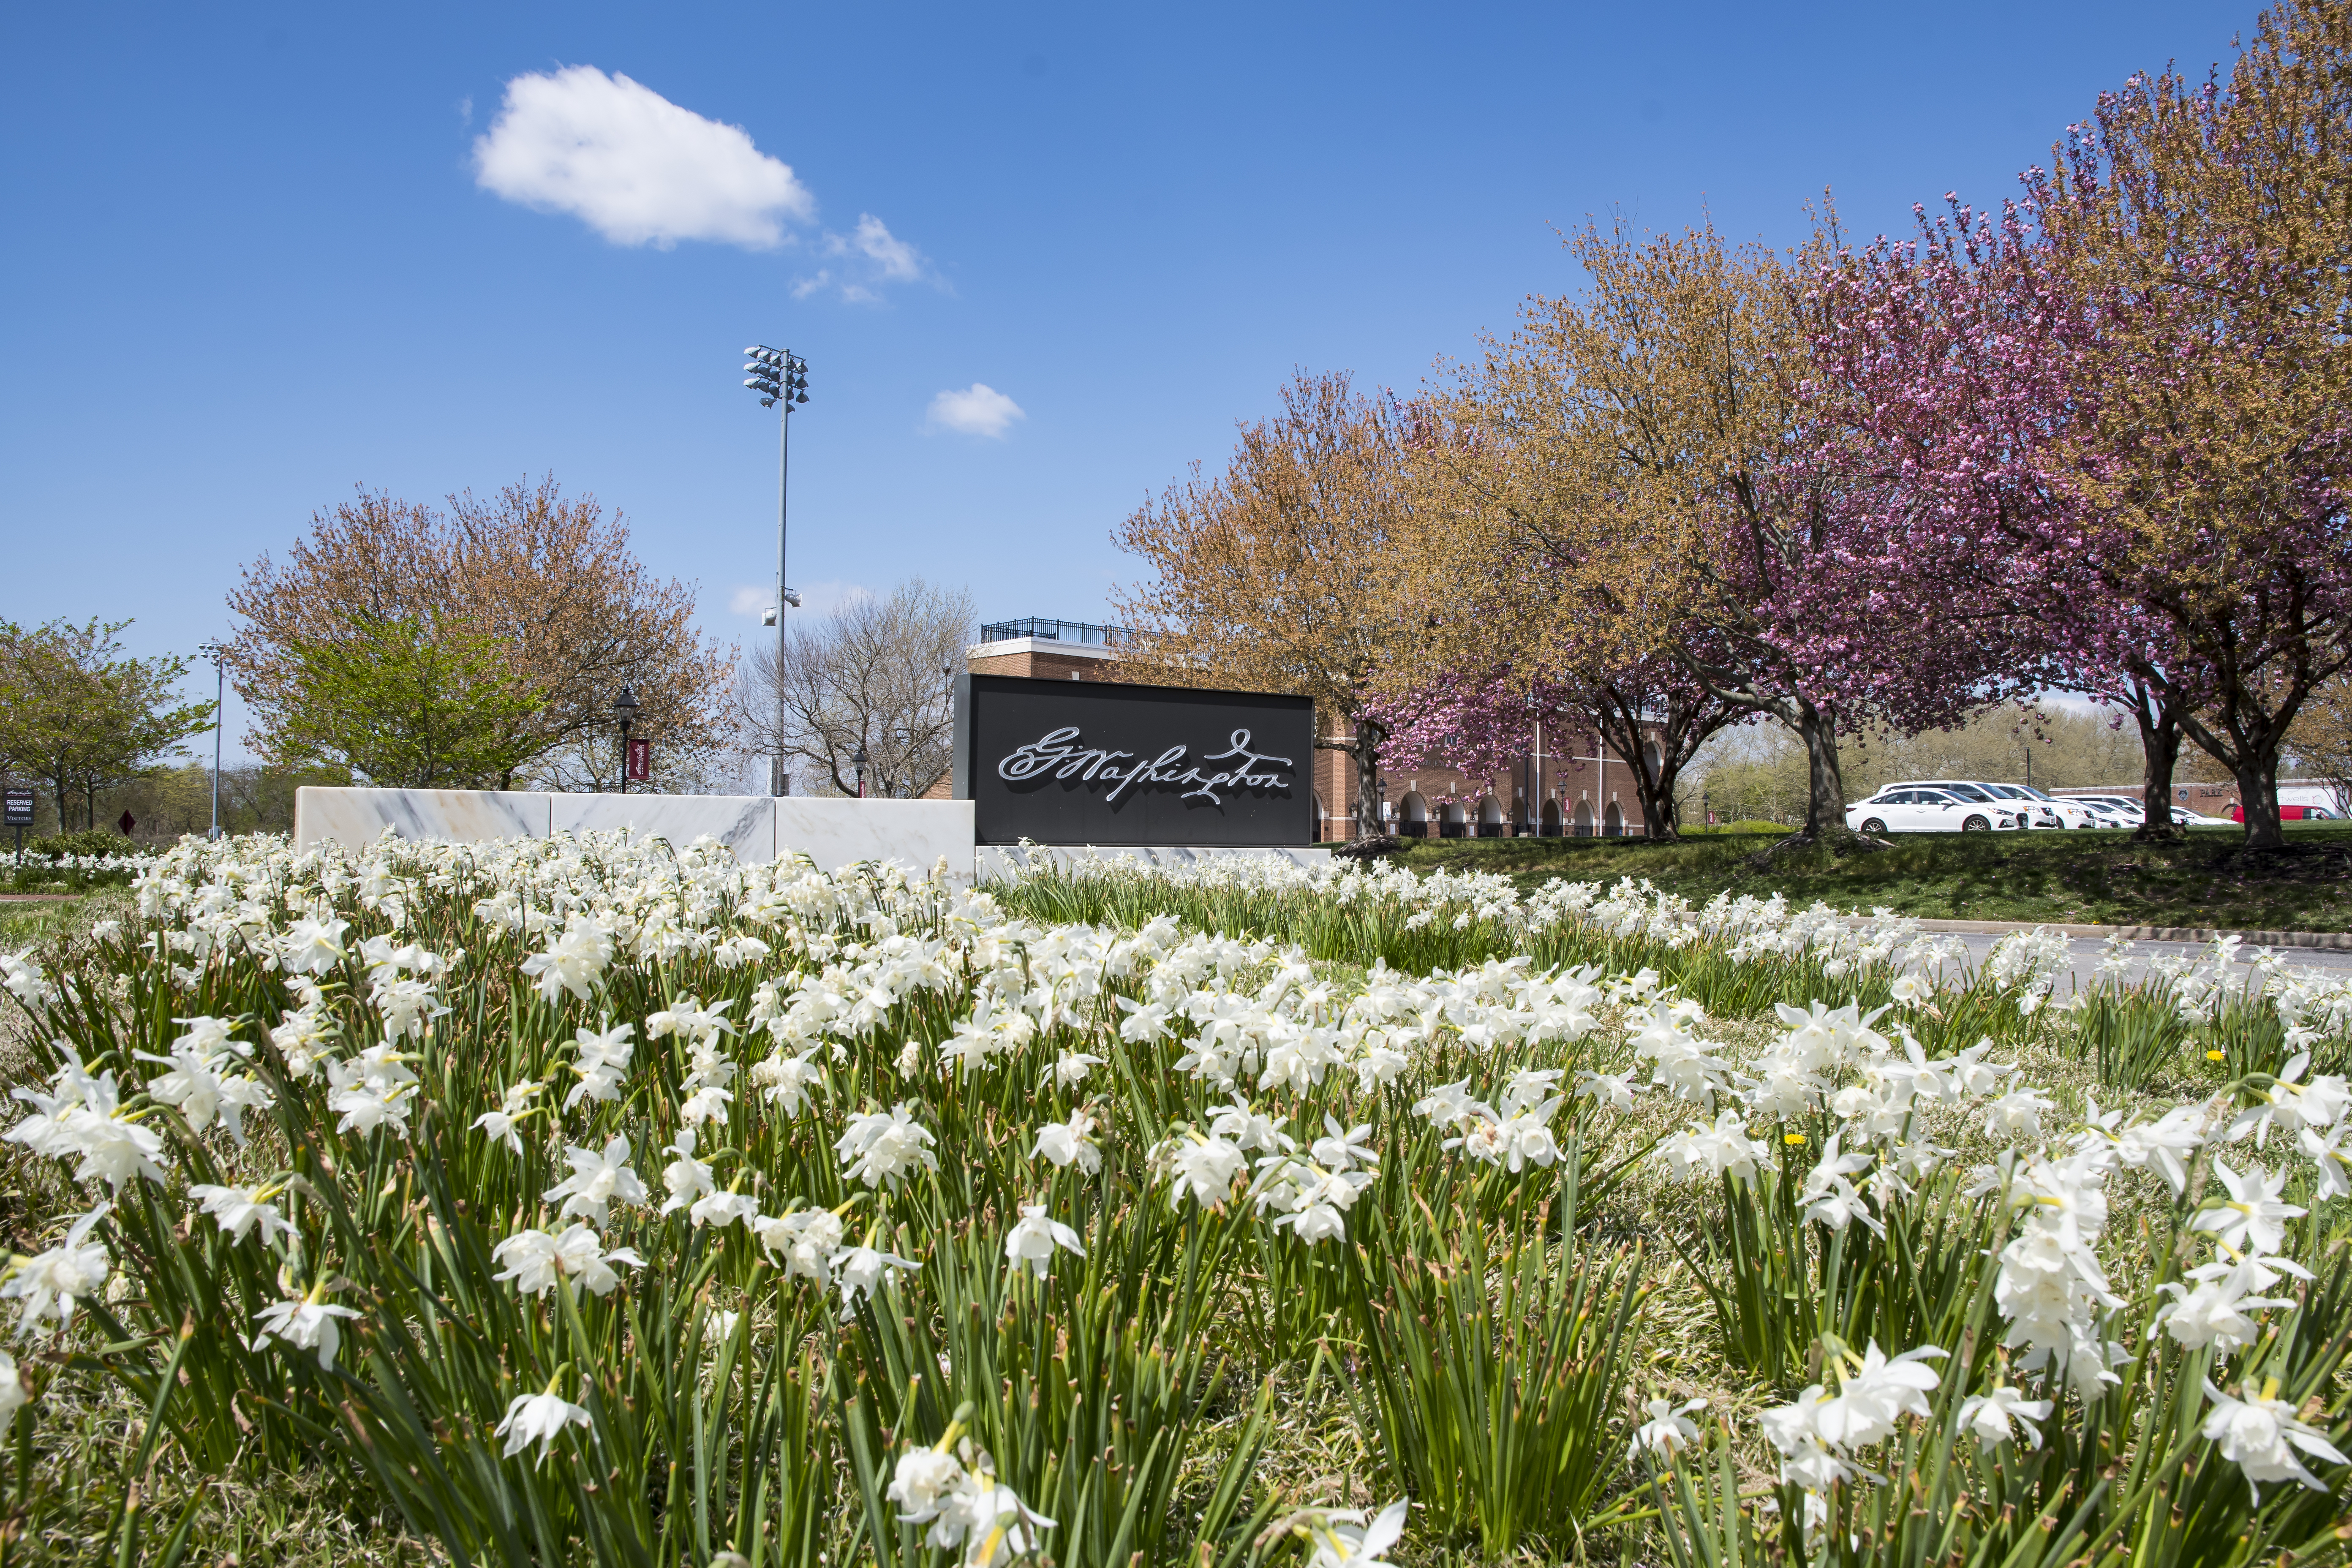 A Washington College sign sits in a patch of white flowers